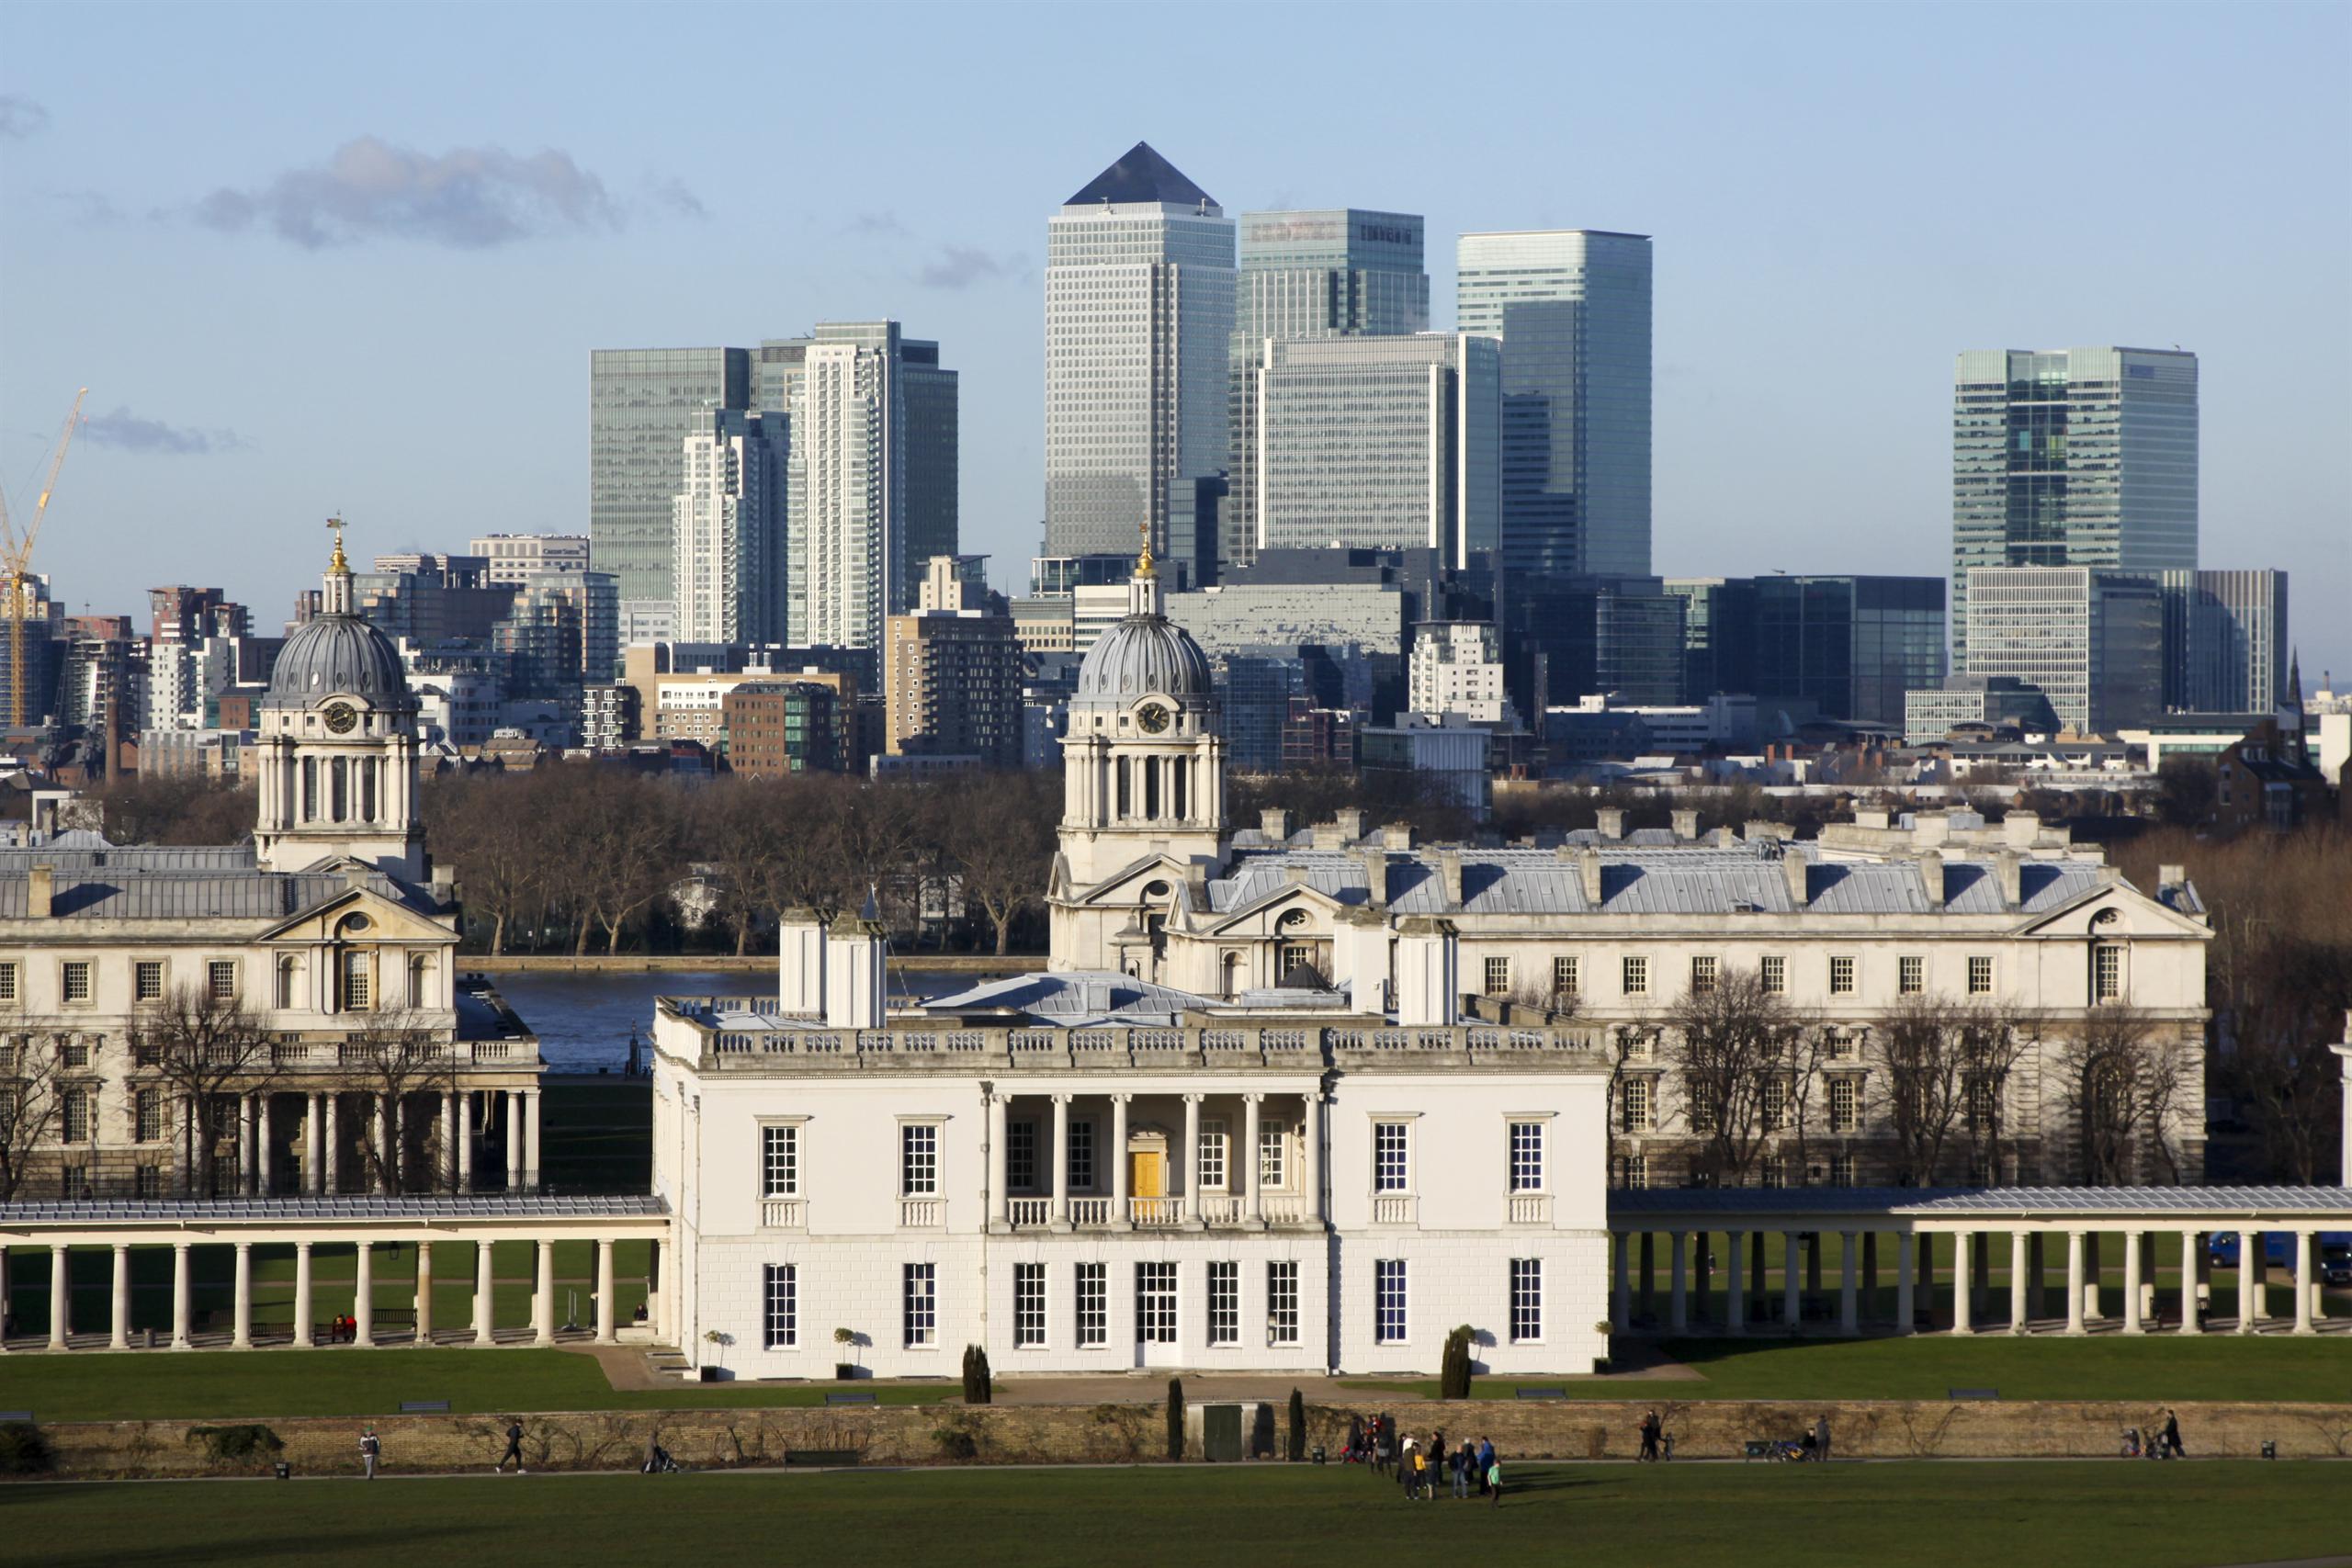 View of the museum and London skyline